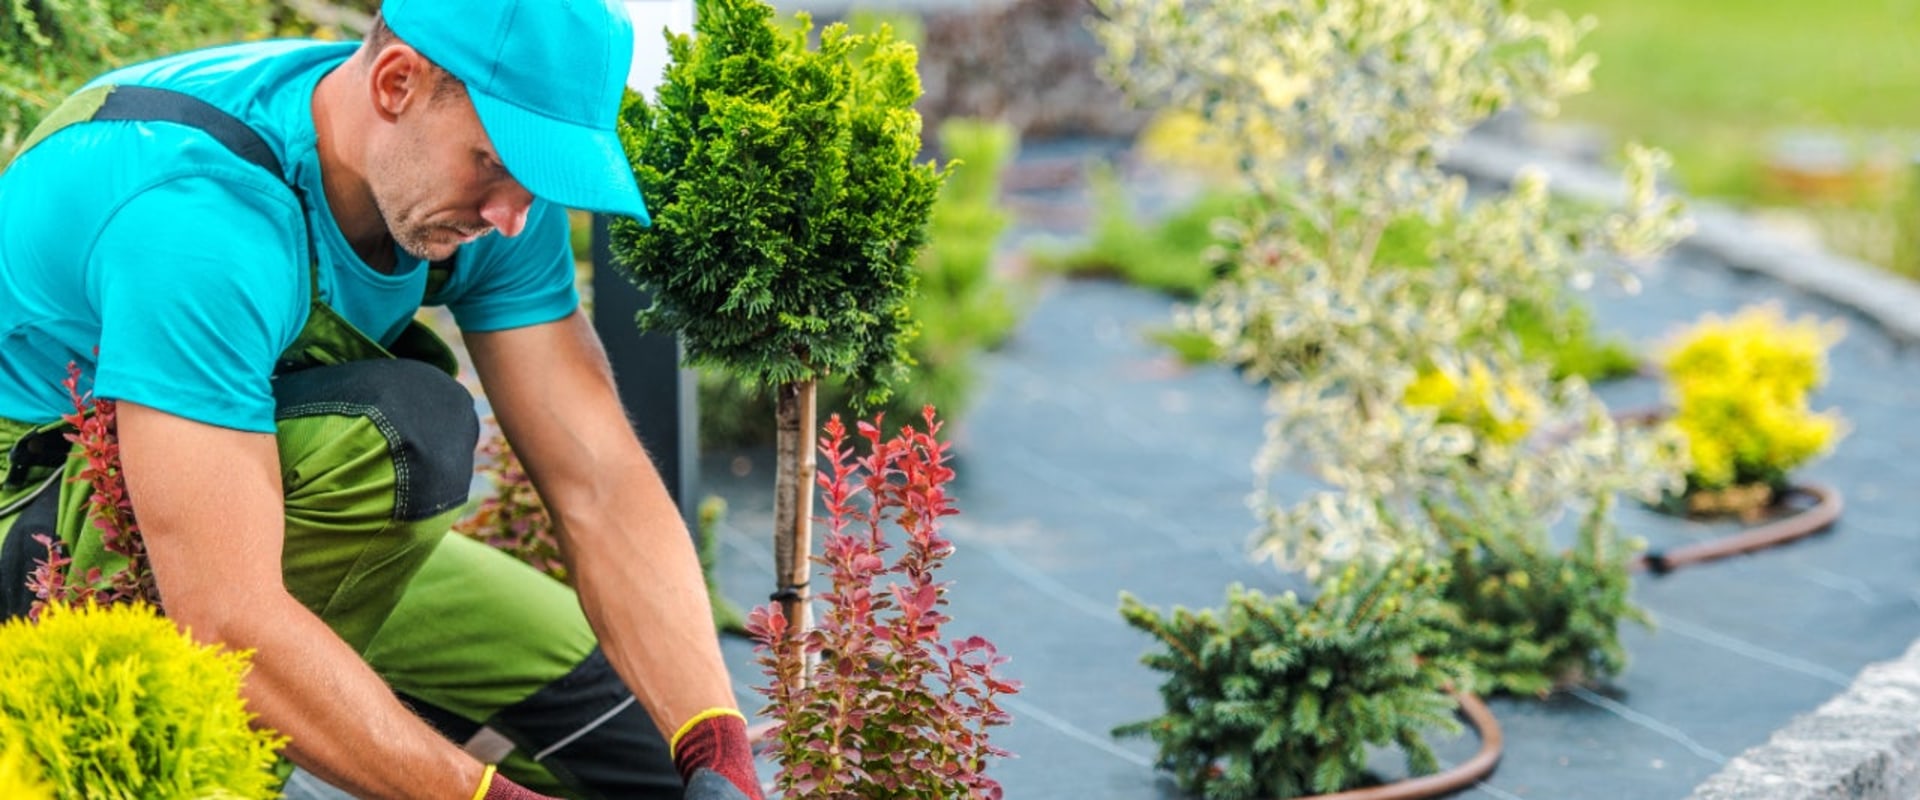 Do landscapers get a lot of money?